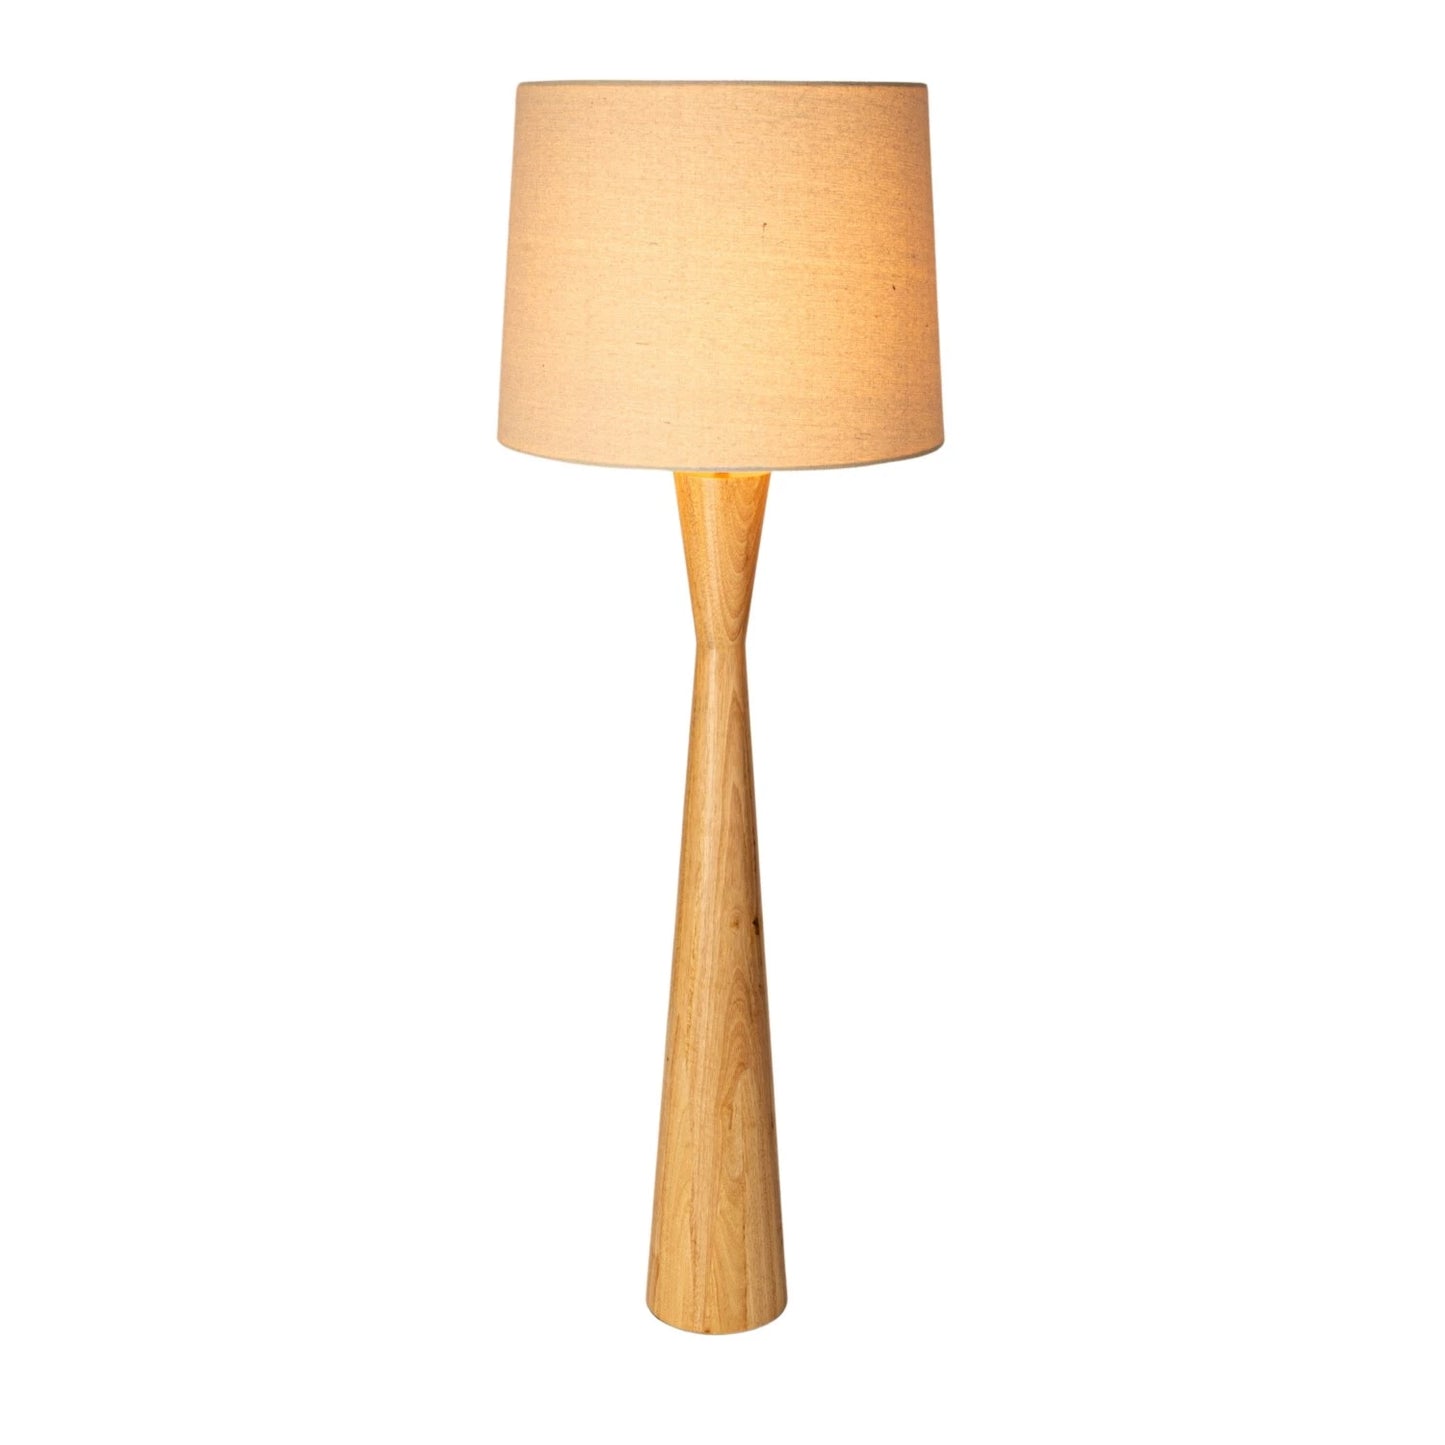 Rubberwood floor lamp with linen shade - Japandi Collection - #8771